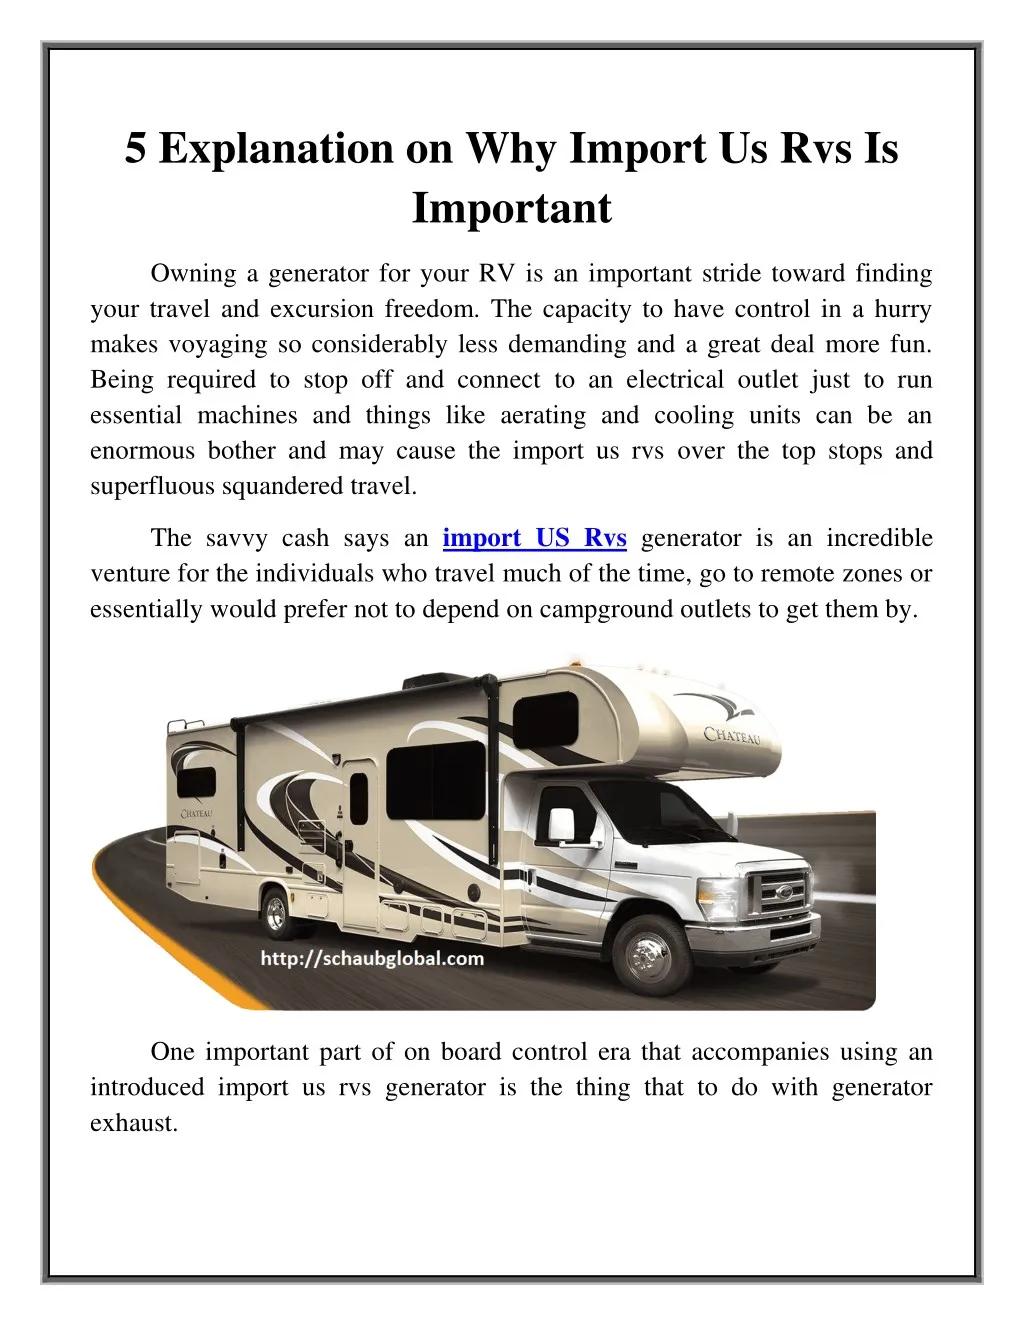 5 explanation on why import us rvs is important